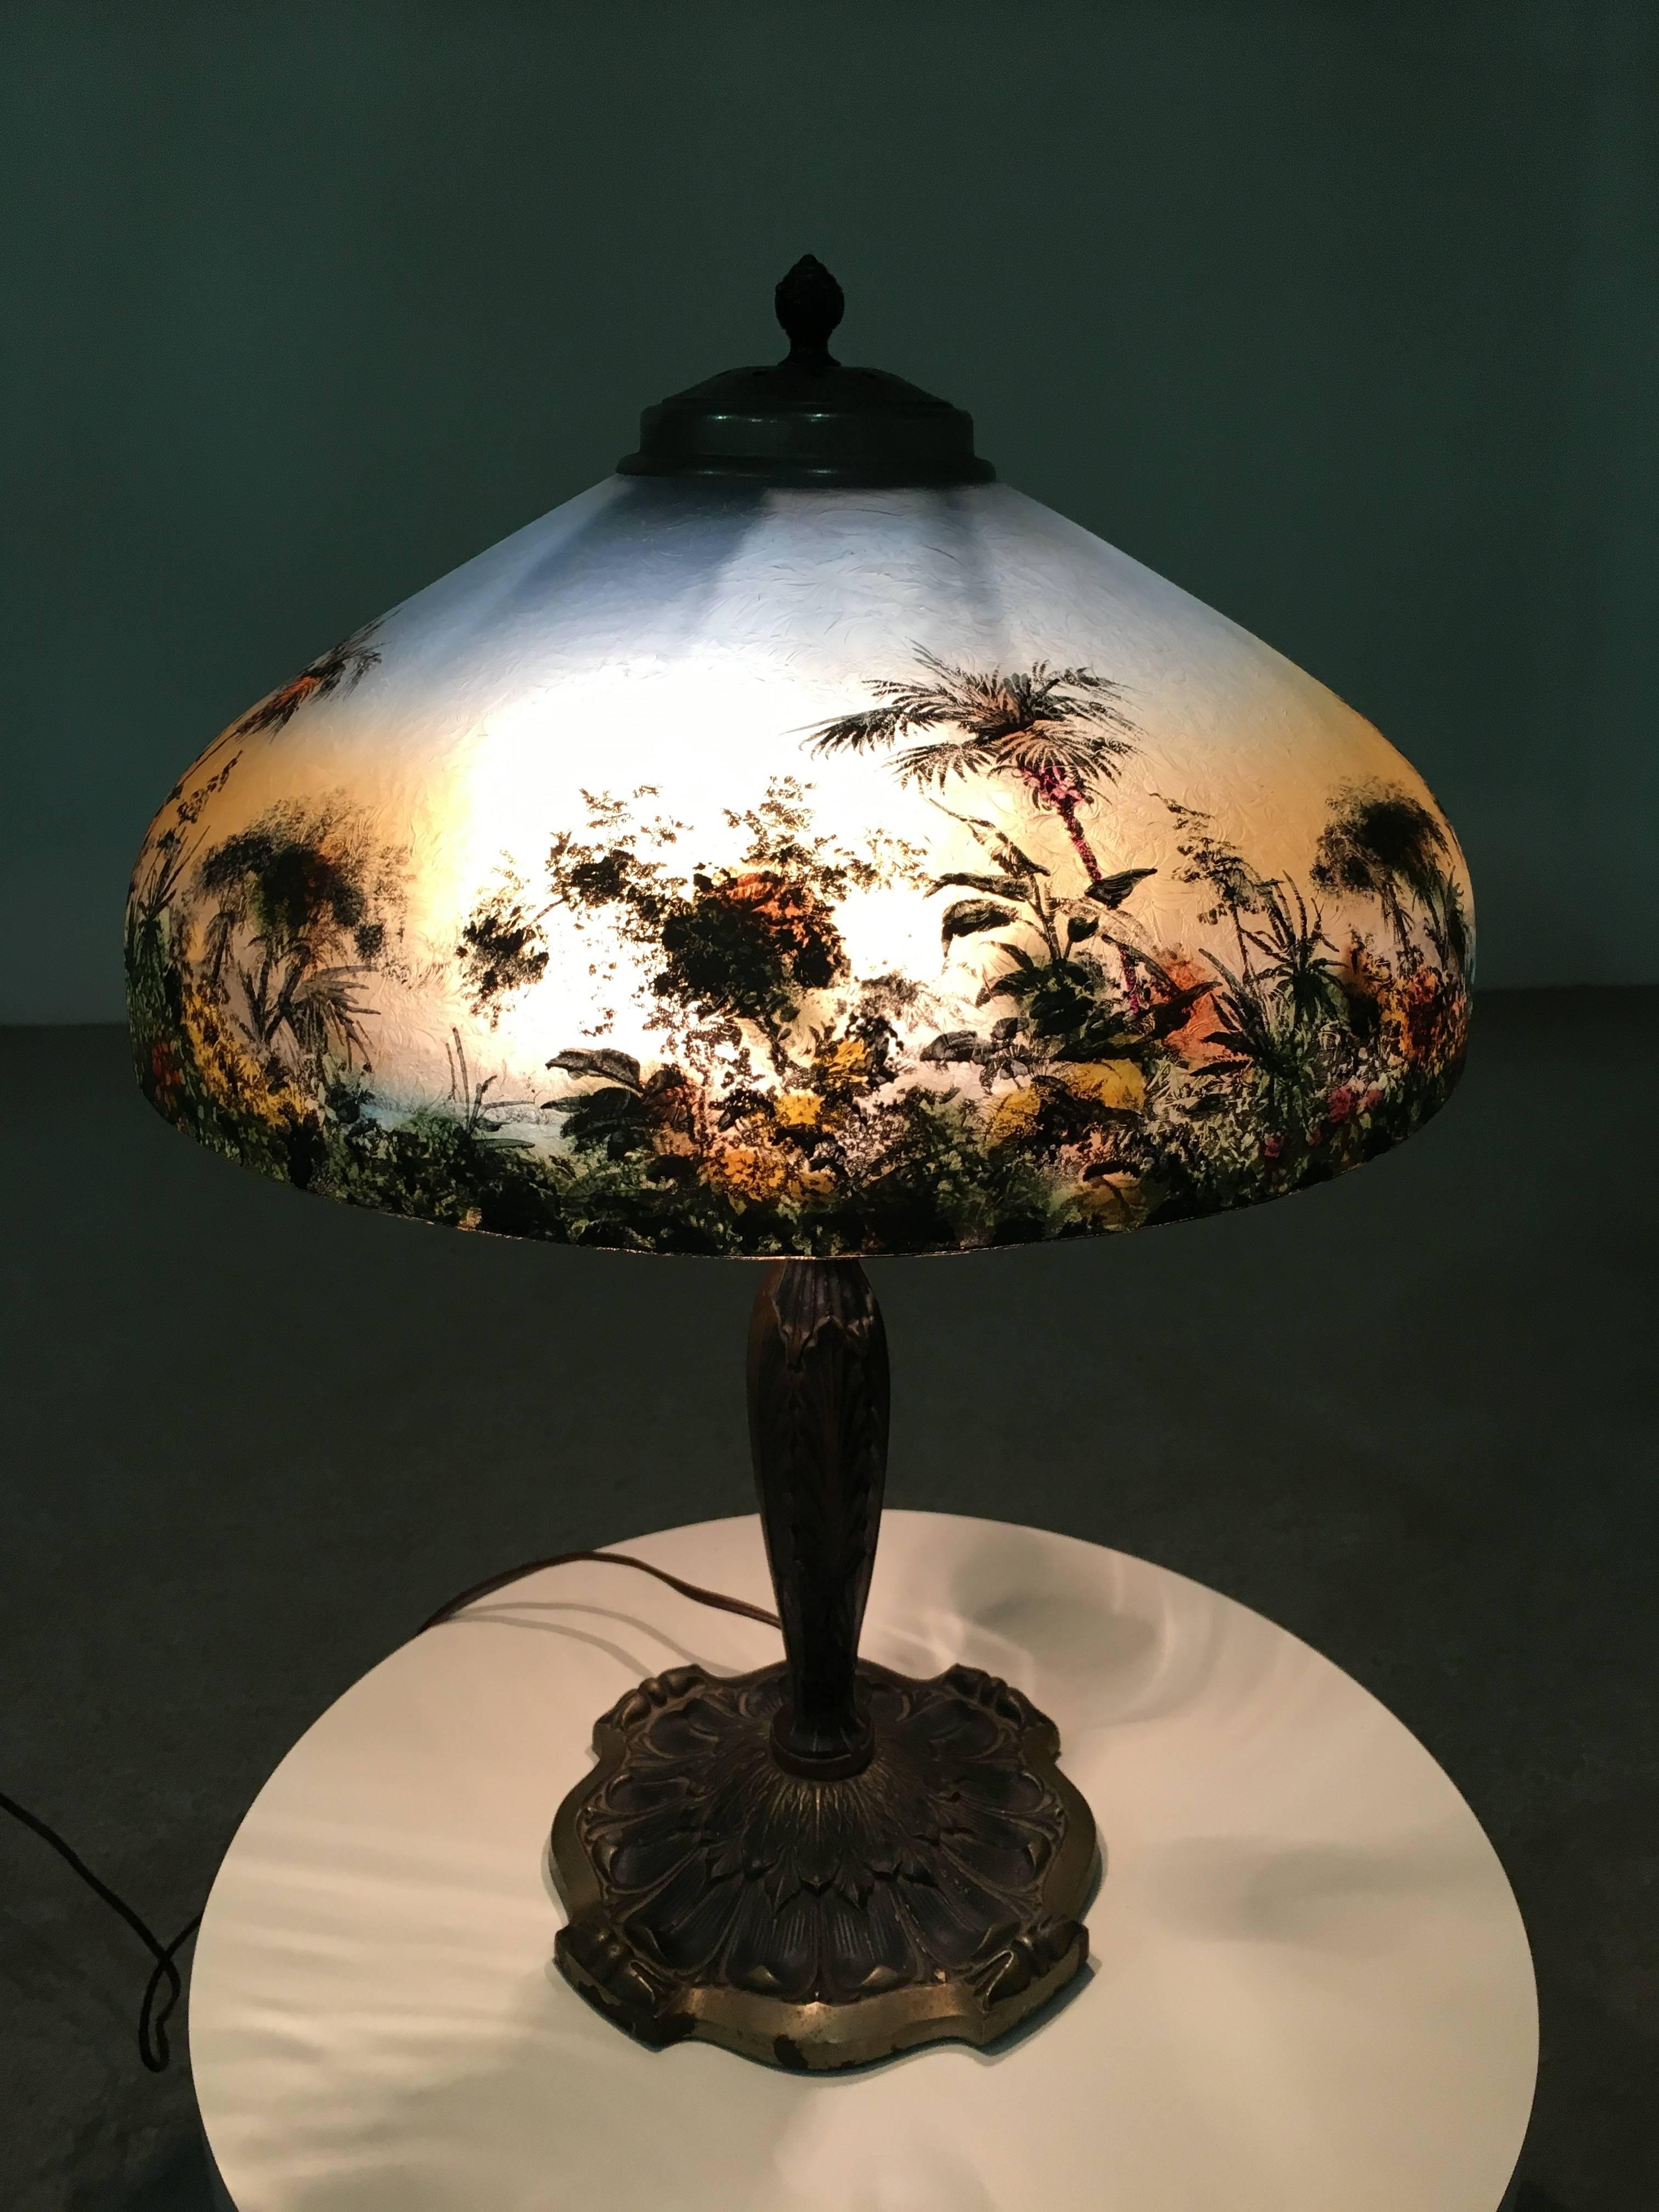 A beautiful 1930s Pittsburgh reverse painted table lamp having lush tree tropical foliage with palm trees and birds throughout atop a bronzed base. Partial Pittsburgh label still visible underneath the shade. Very good condition having no cracks or